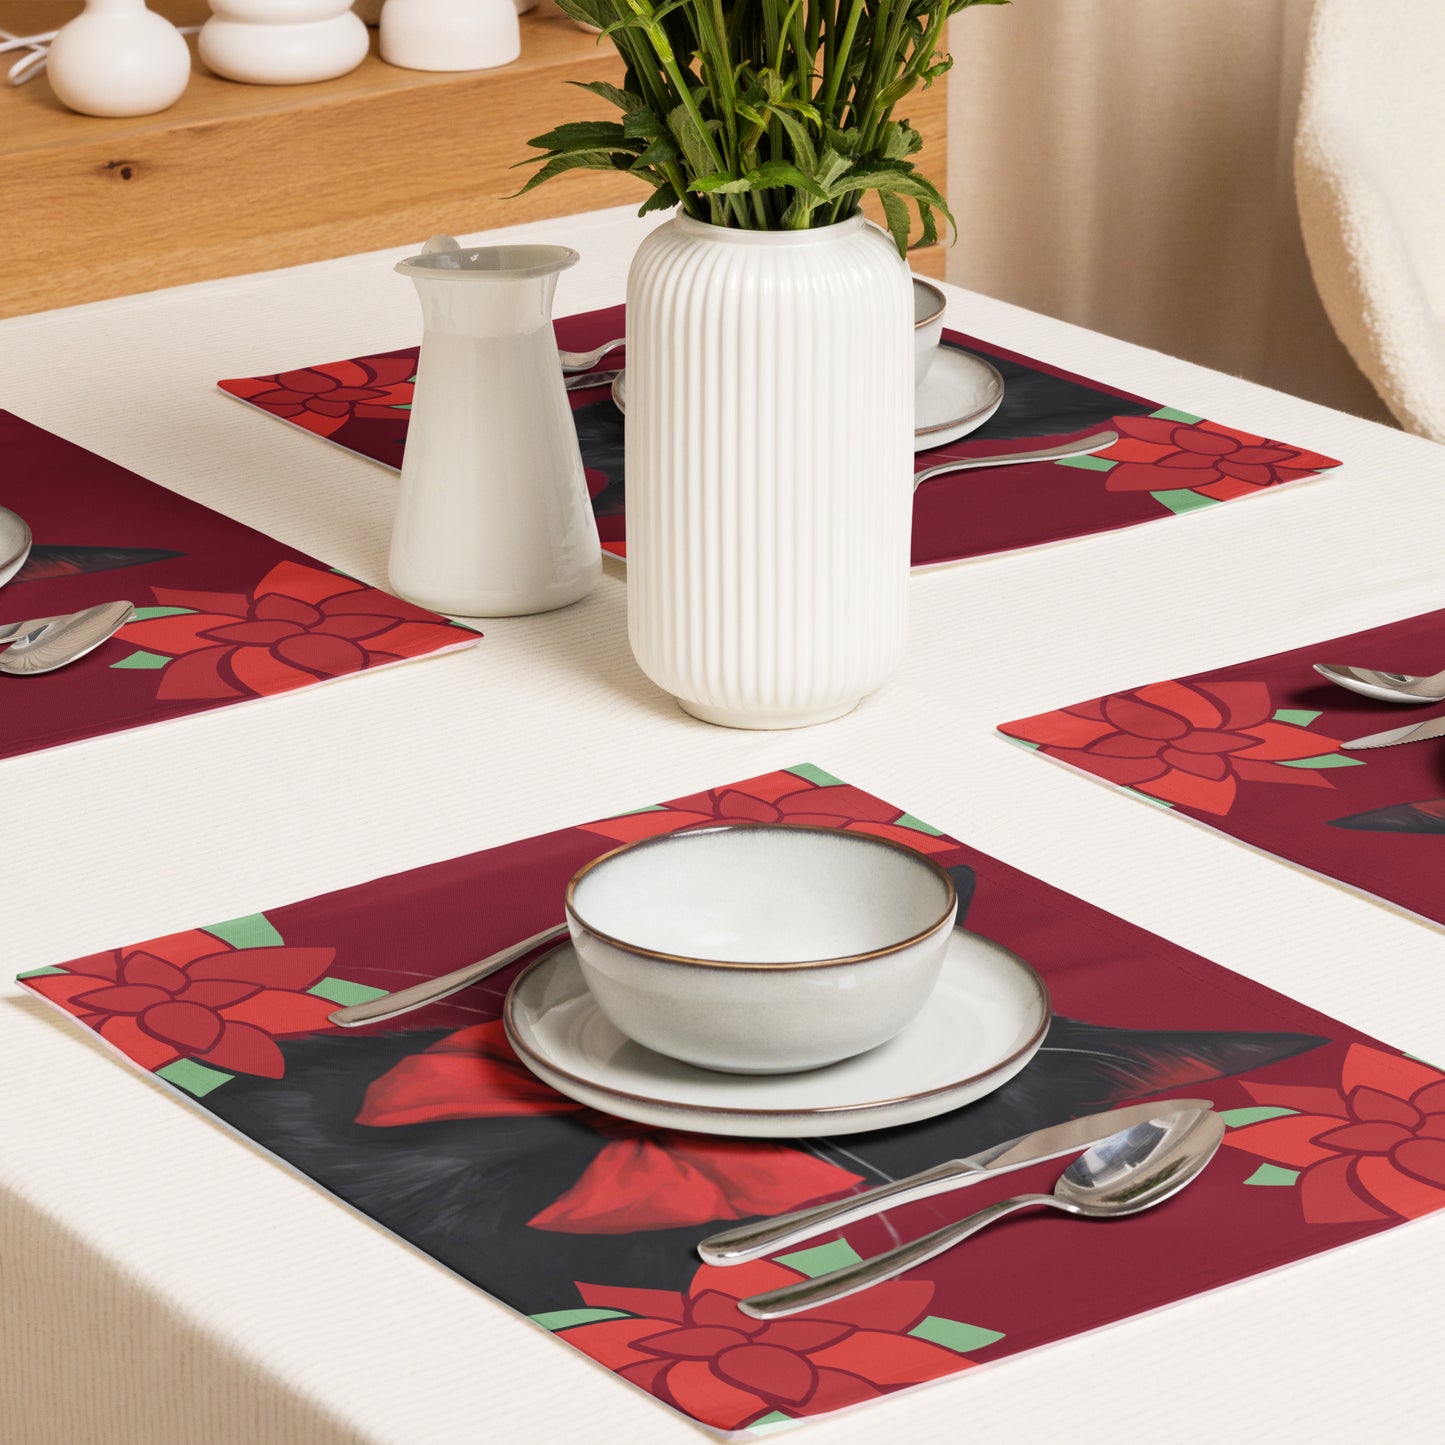 BLACK KITTY RED BOW PLACEMAT SET